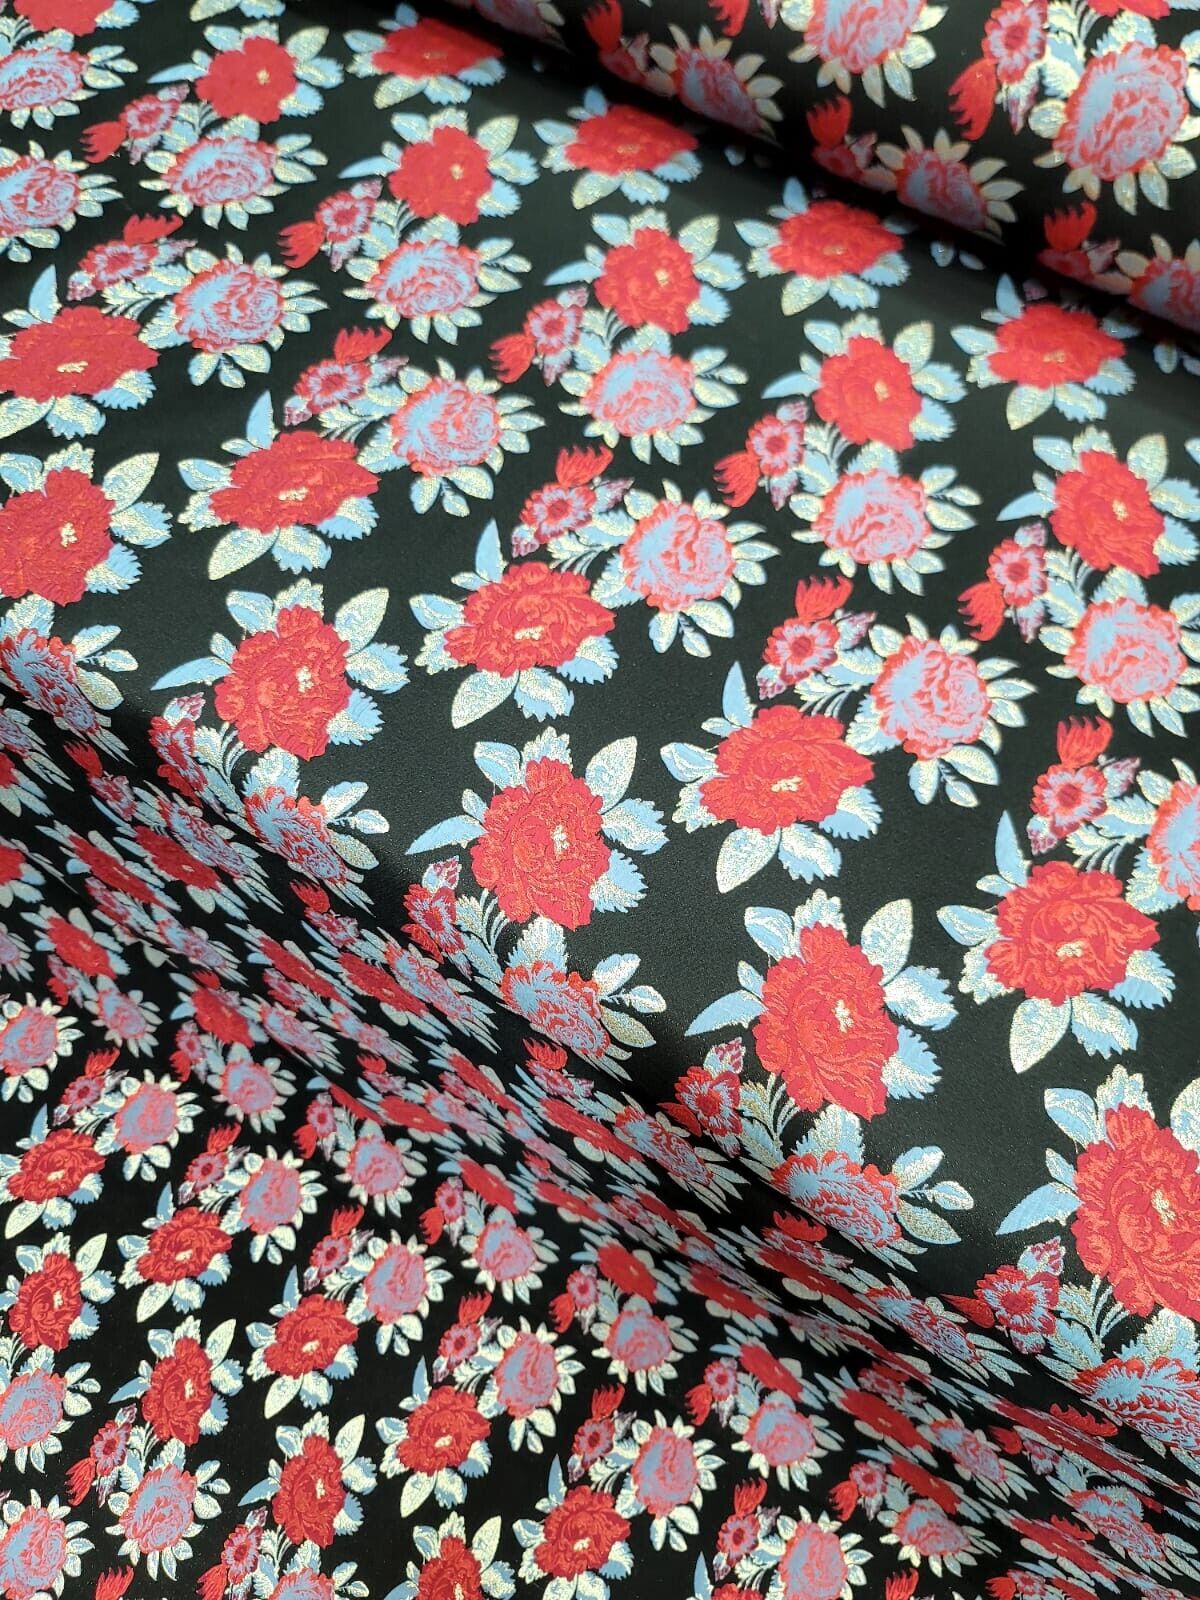 Baby Blue Red Floral Black Brocade Fabric - Sold By The Yard - For Dress Prom Bridal (60” Width)